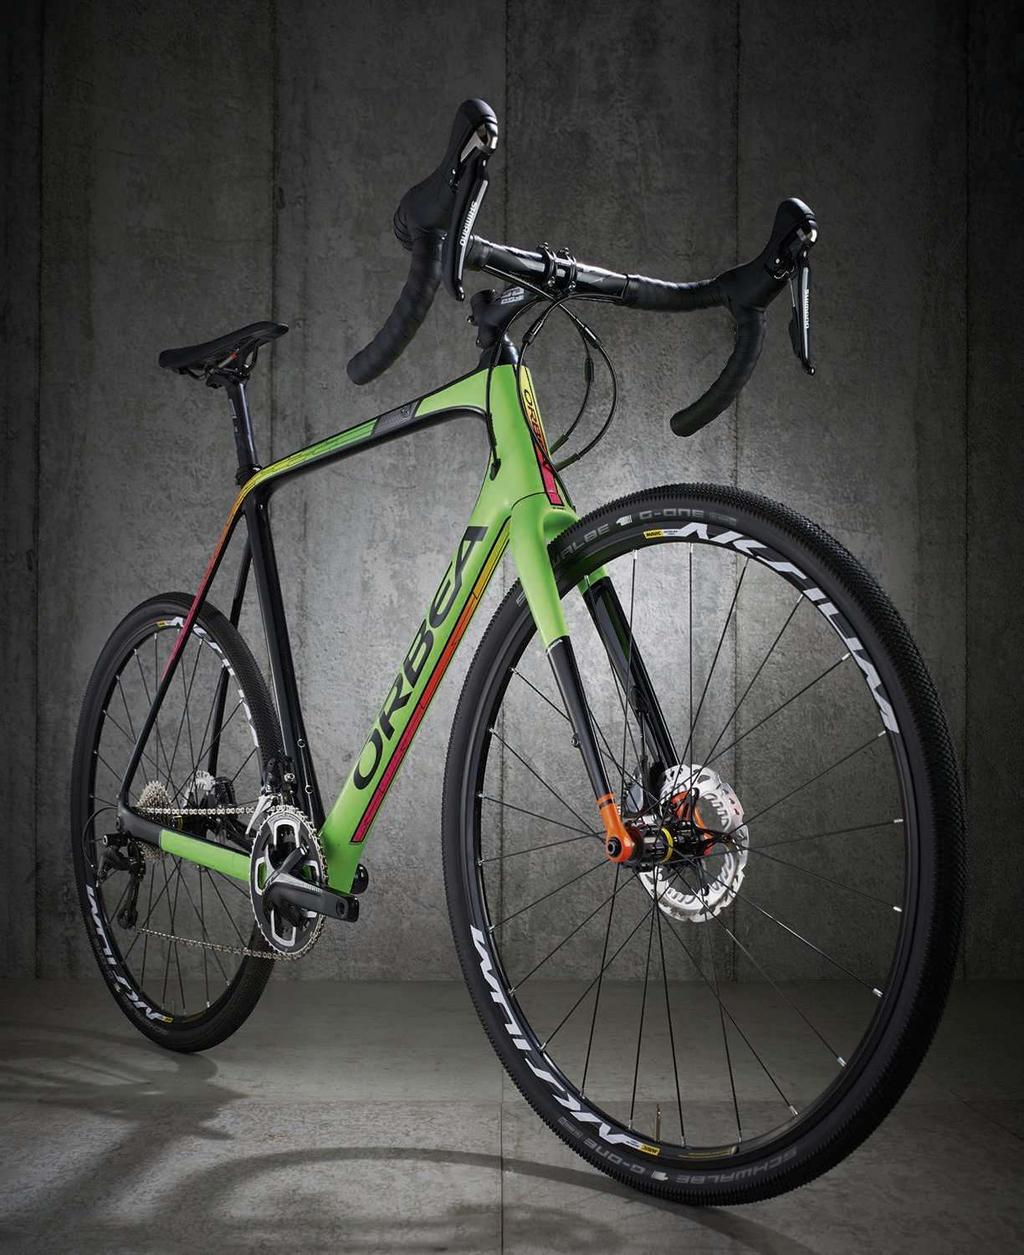 Orbea claims an 1190g frame weight for the Terra. As this one s built for toughness not lightness that s a decent compromise weight wise. Orbea backs up that toughness claim with a lifetime warranty.